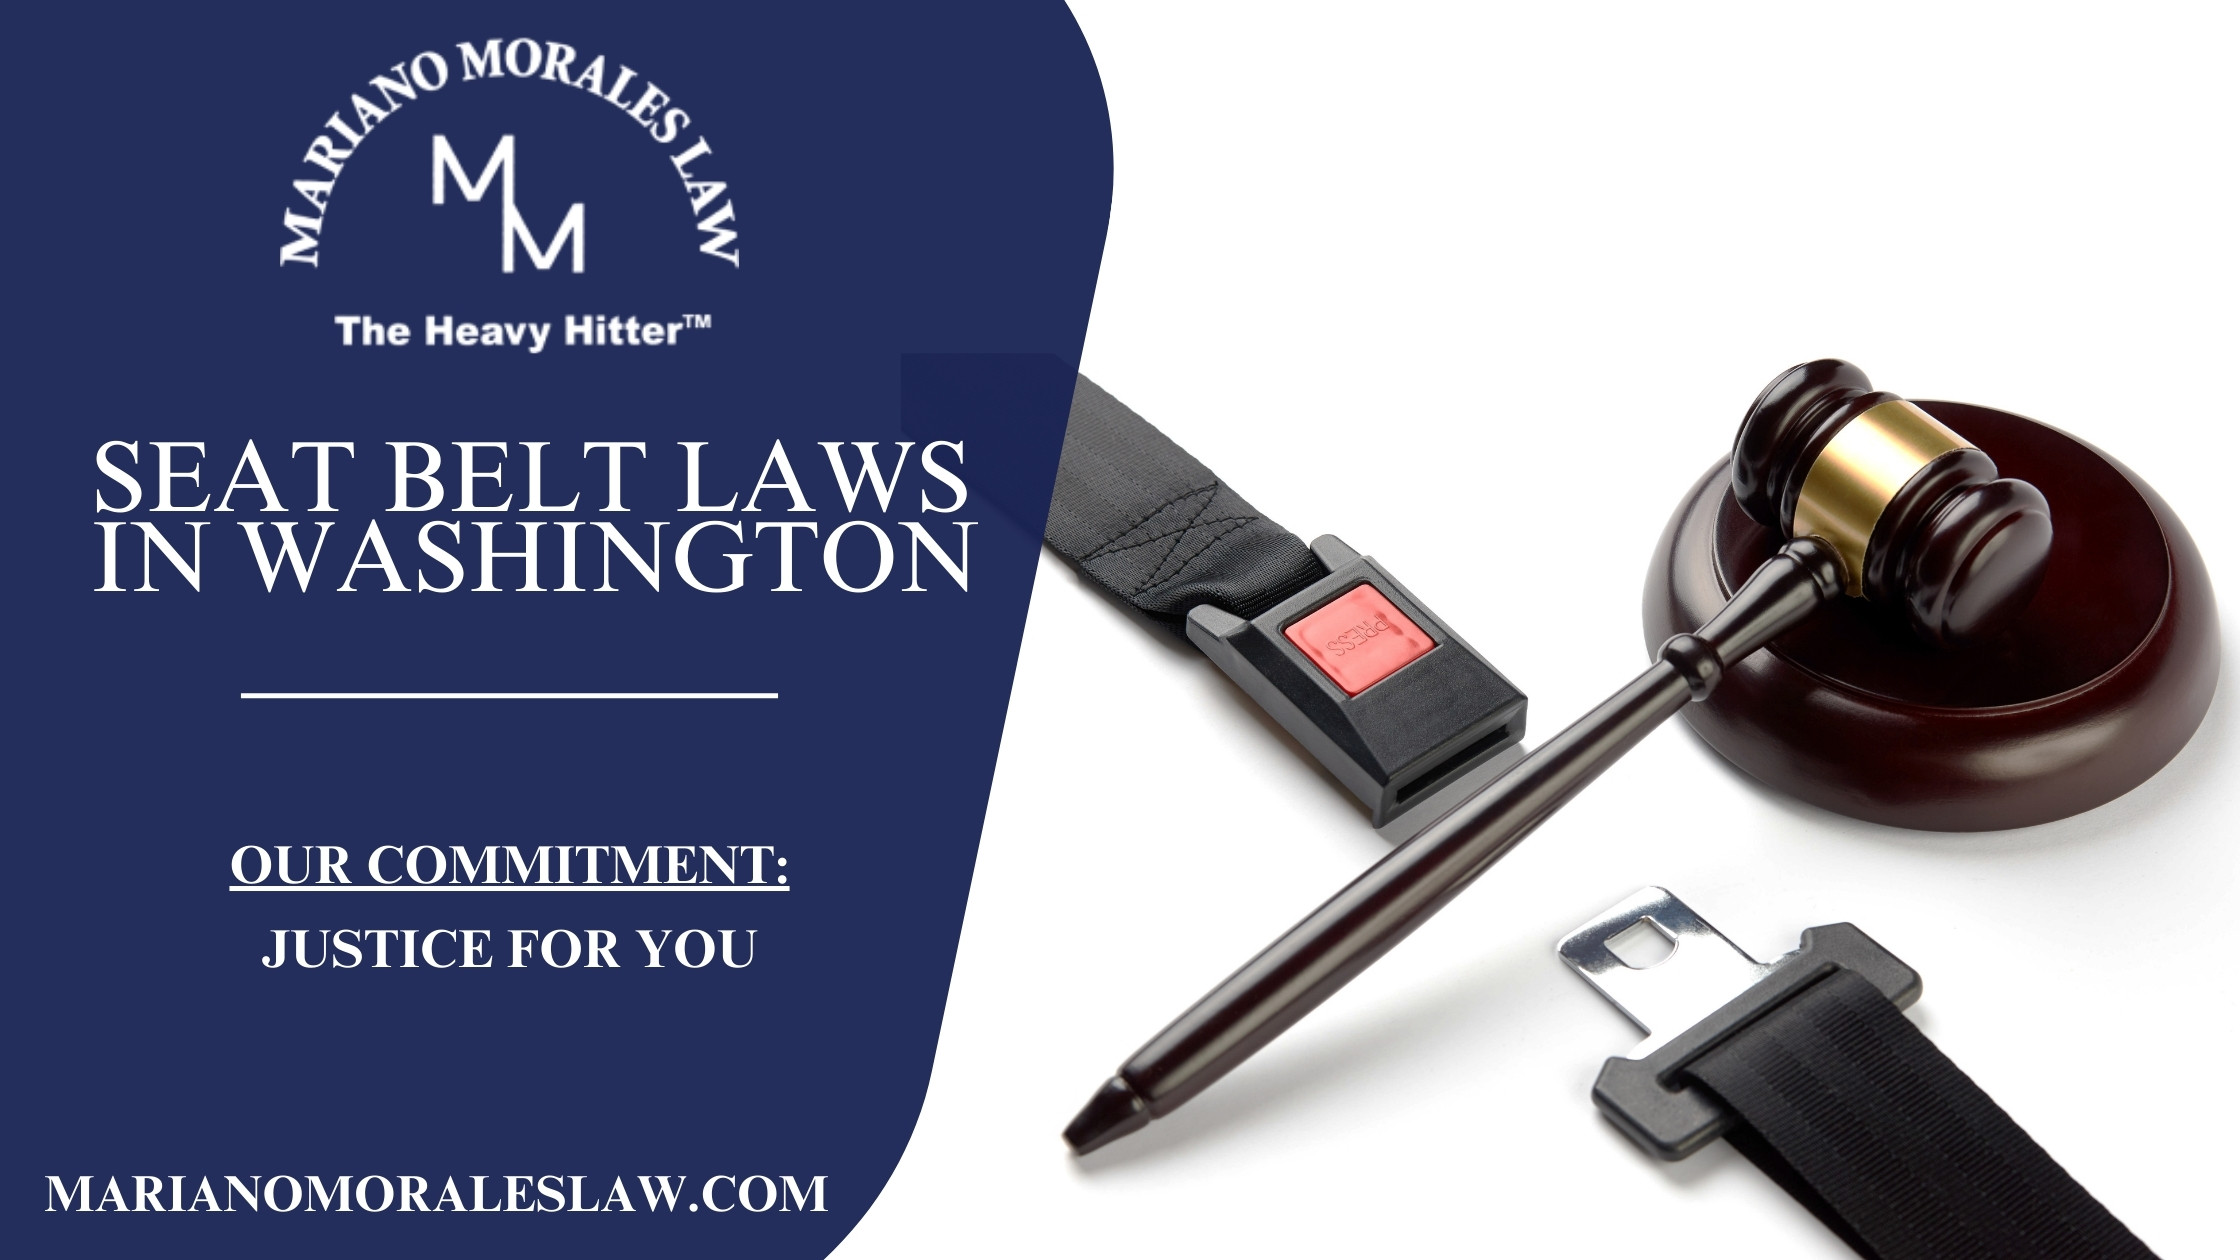 A professional promotional image for Mariano Morales Law focusing on "Seat Belt Laws in Washington", featuring a seat belt and a judge's gavel, symbolizing legal authority and safety compliance.